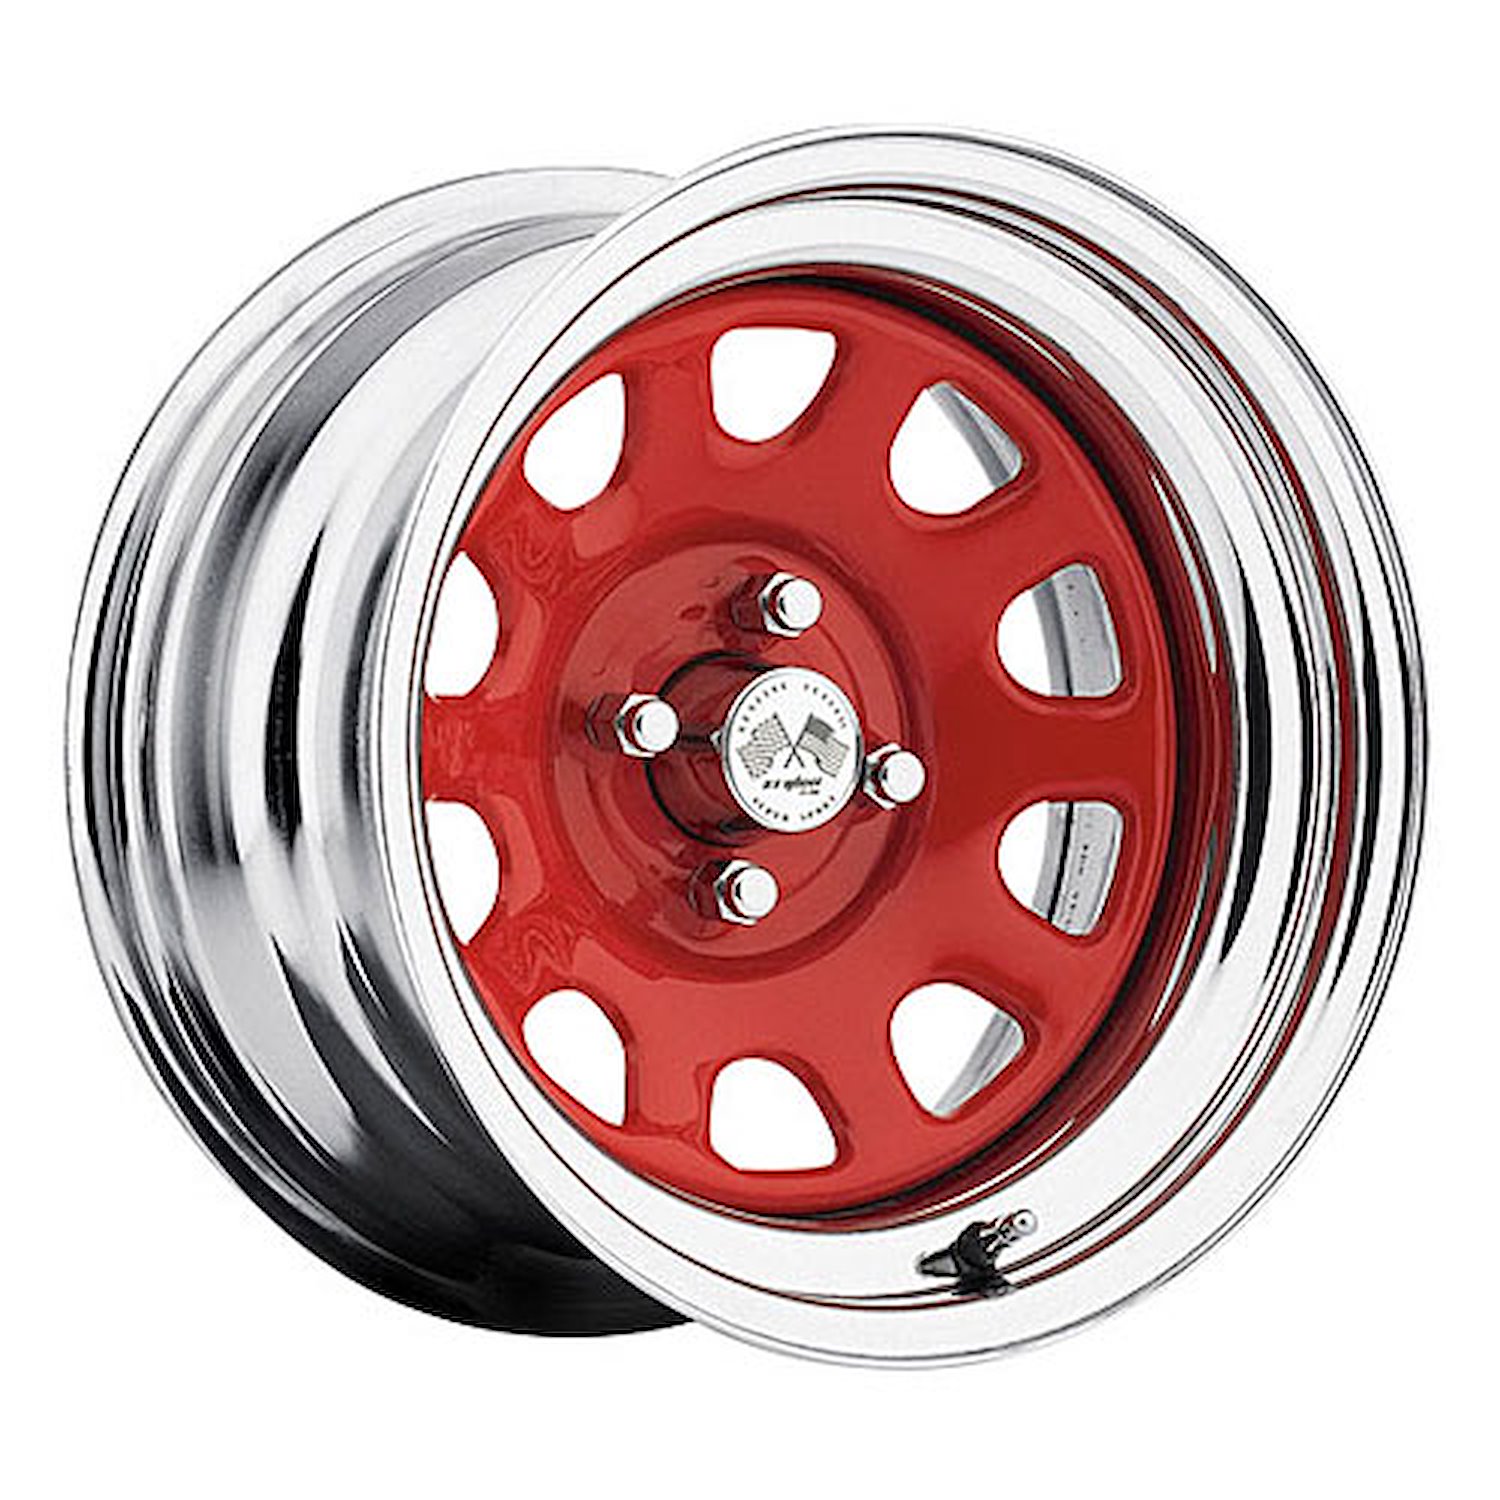 CHROME DAYTONA FWD DRIFTER RED 15 x 8 5 x 45 Bolt Circle 4 12 Back Spacing 0 offset 266 Center Bore 1400 lbs Load Rating